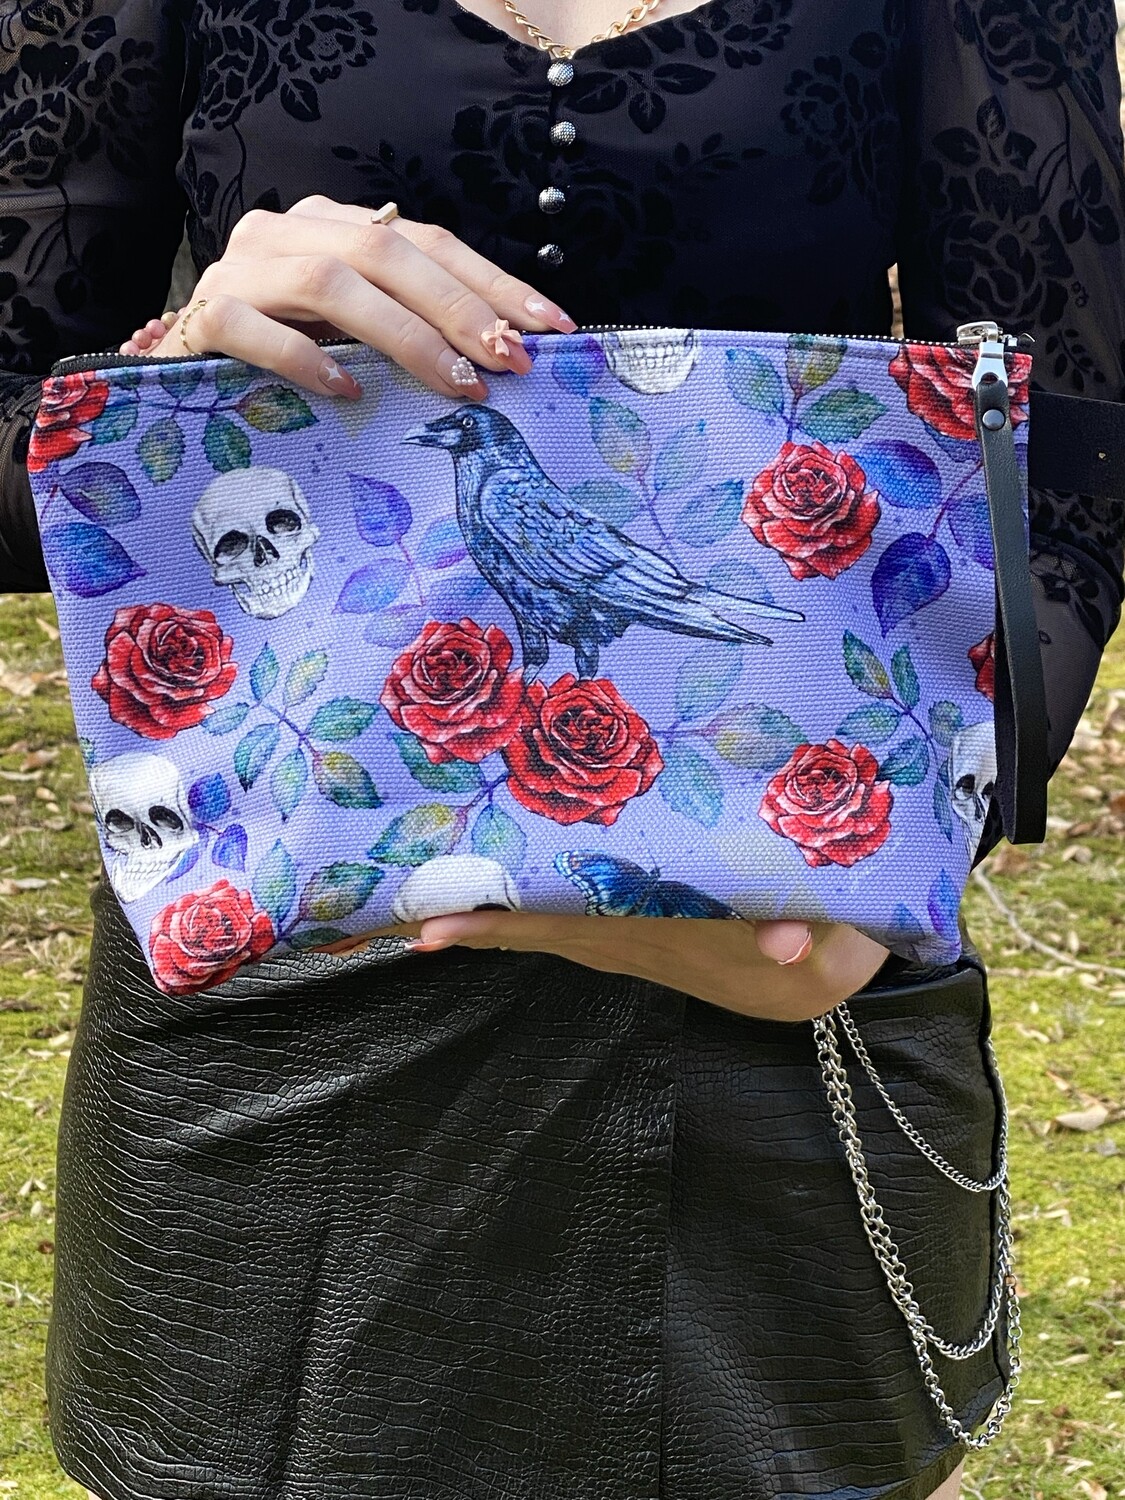 Goth Glam illustrated Make up bag featuring a raven, roses and watercolored leaves on a purple background